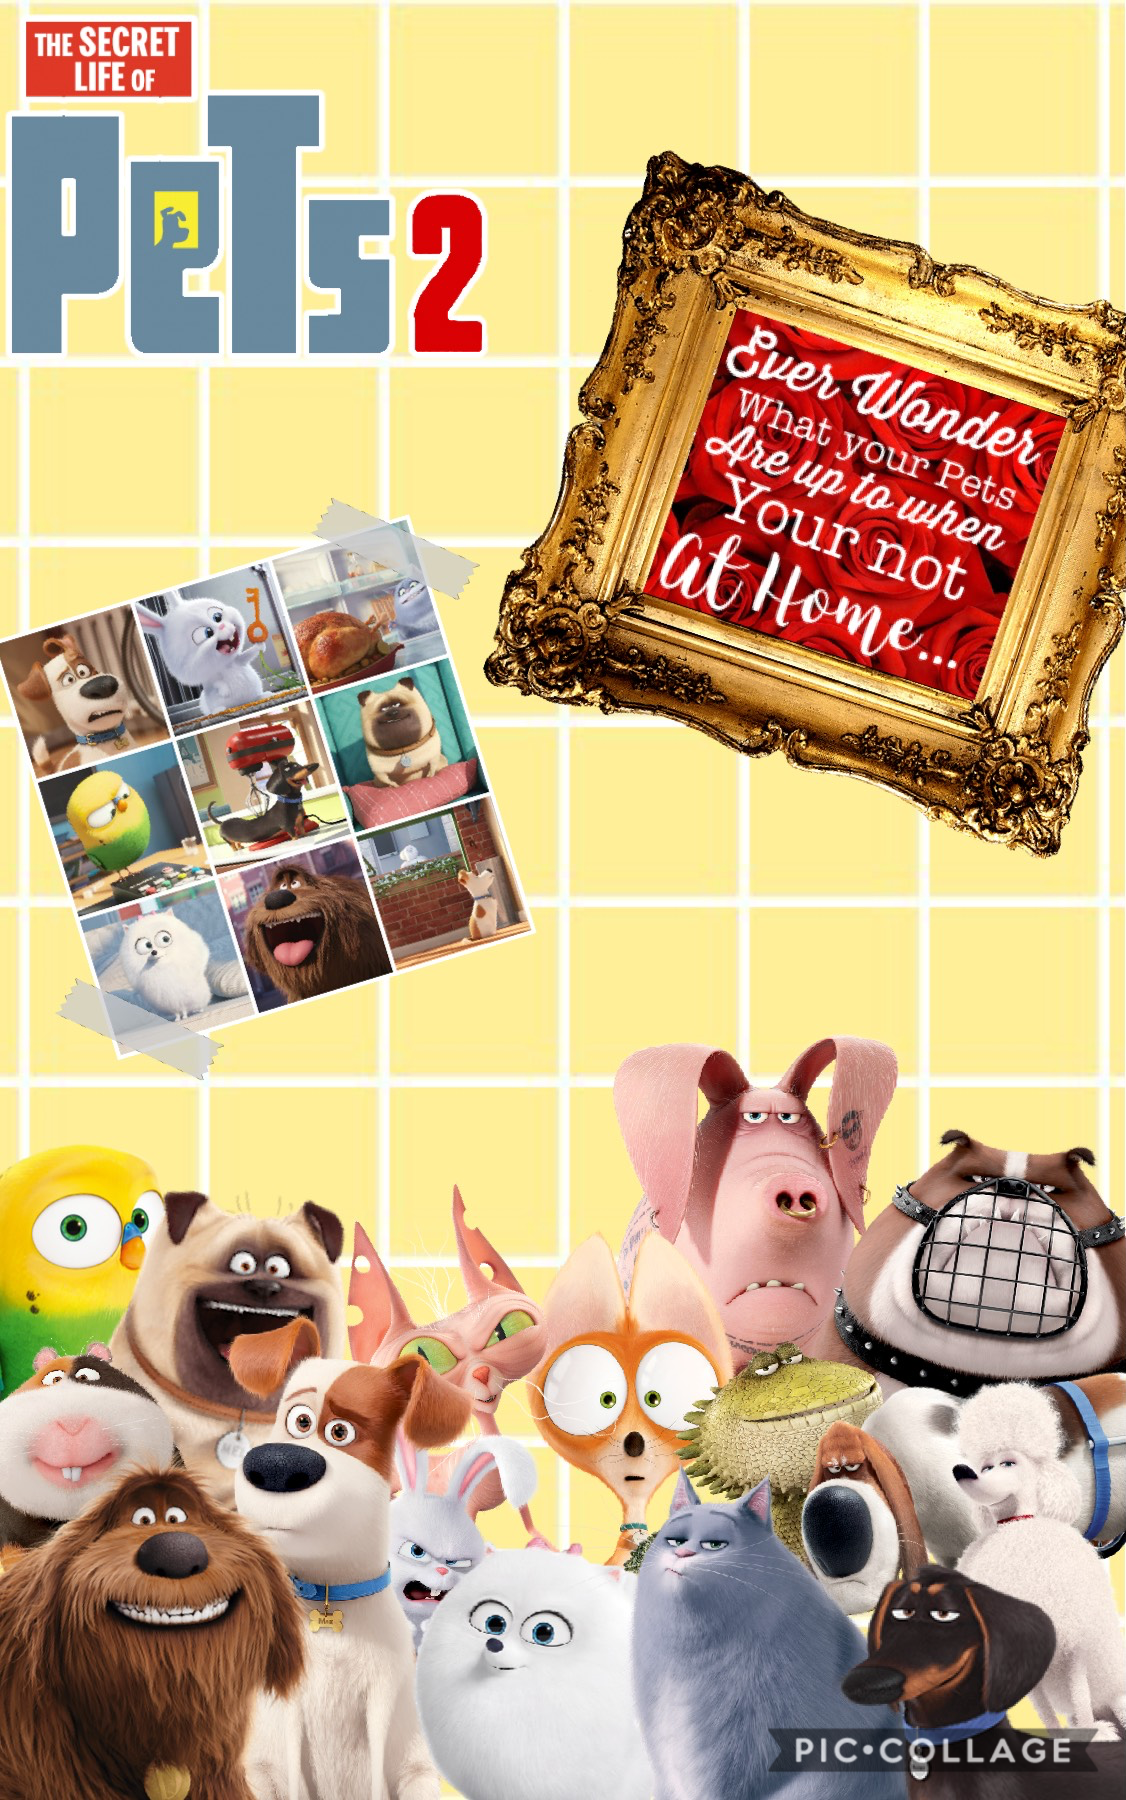 🥳Tap🥳
Next I might do a Toy story one, I might start to do more movie collages. I haven’t seen the movie yet but I just thought it would be fun to make a collage of It. Soon I will be doing a post with more info about me!